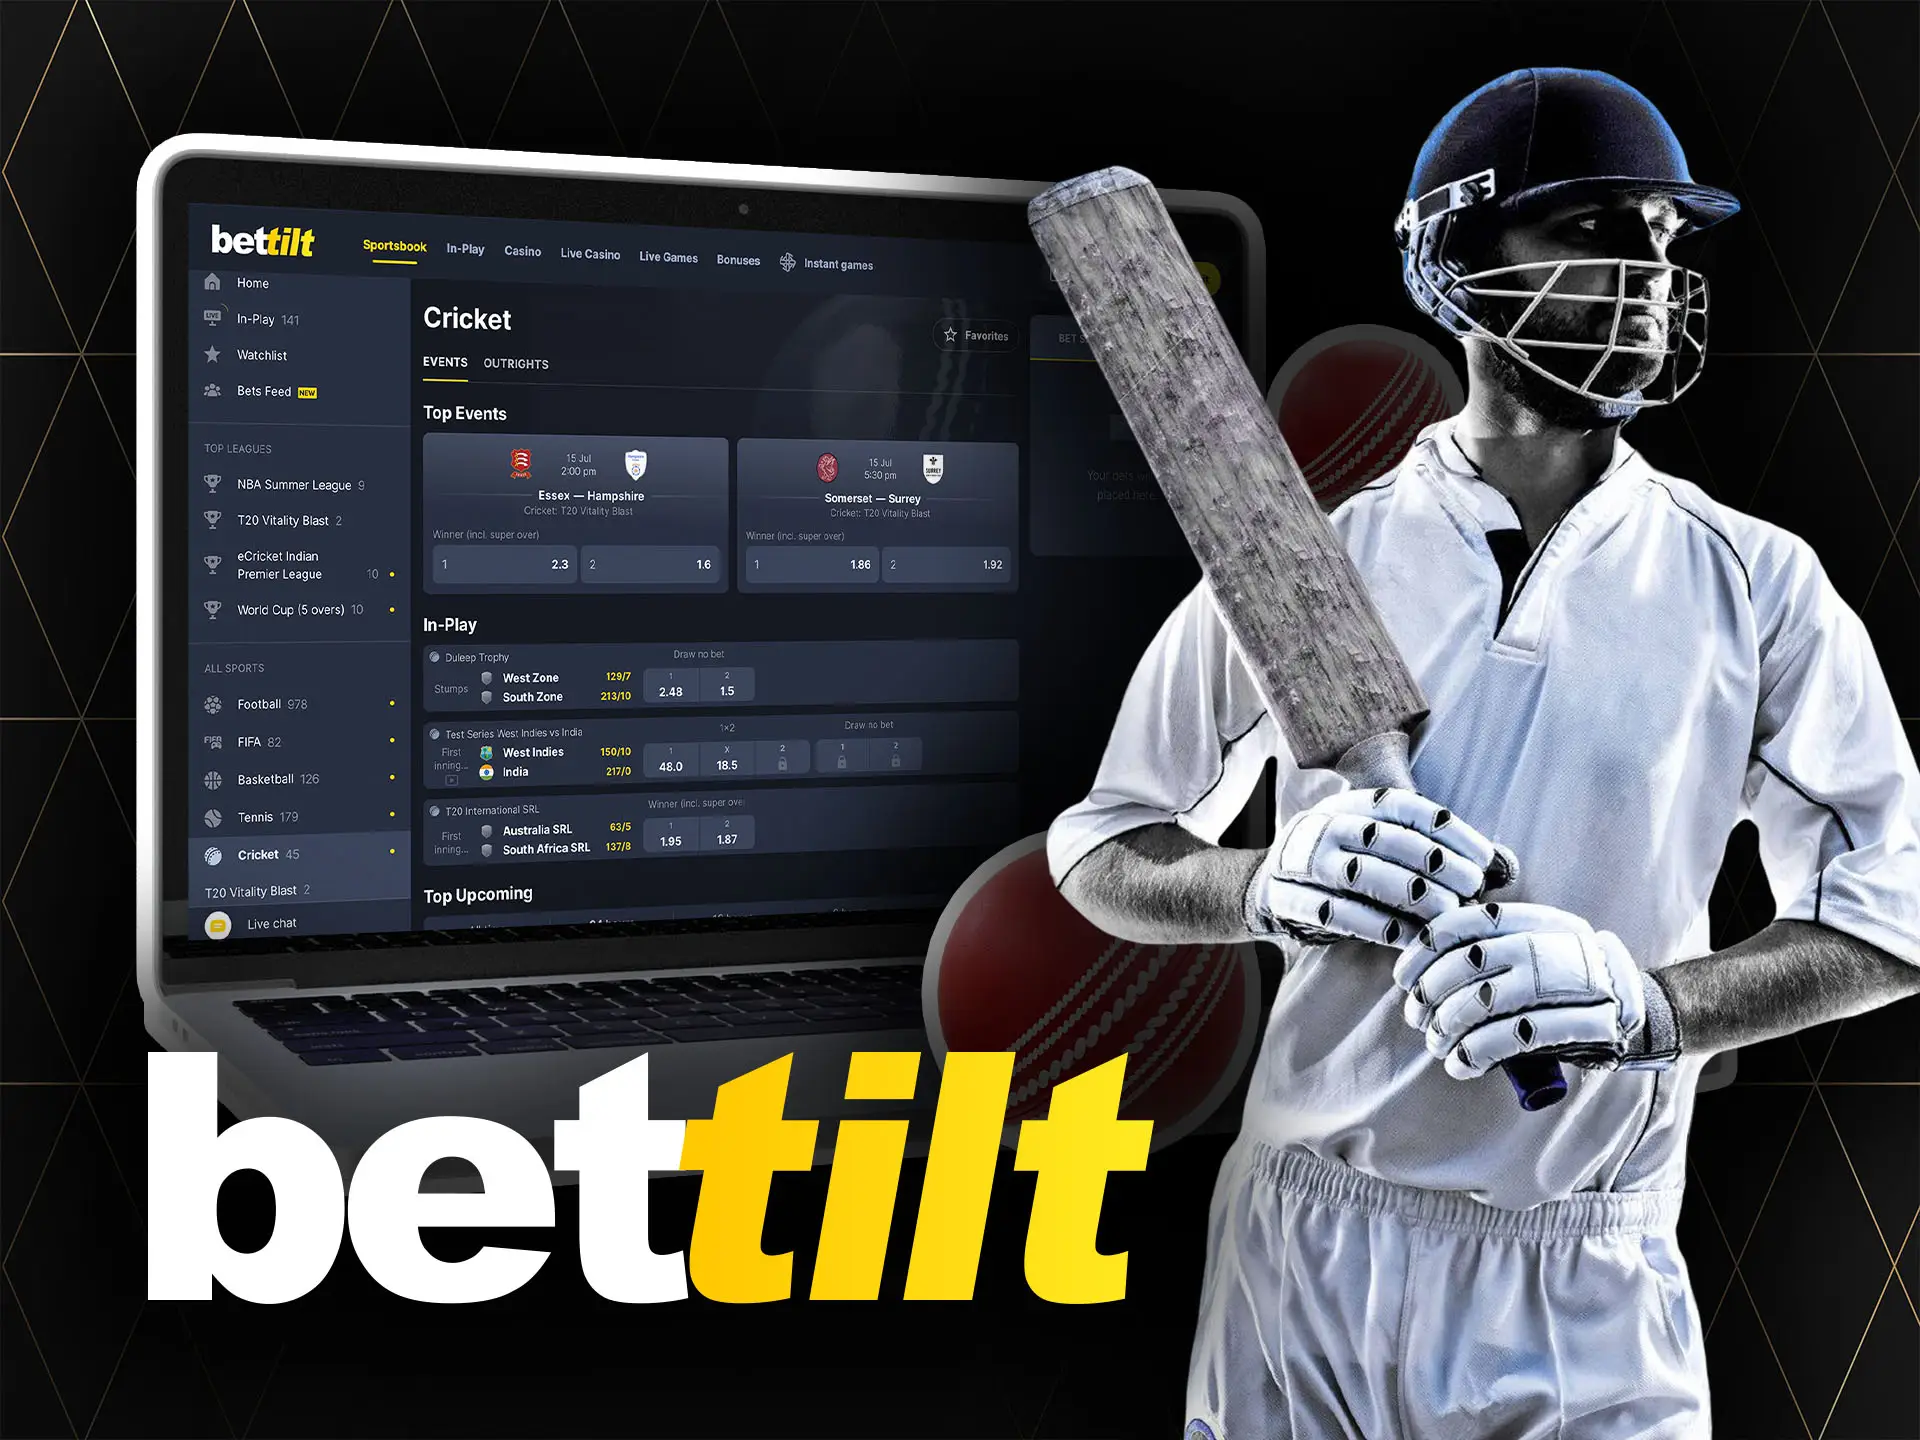 Bettilt presents many various events for cricket betting.